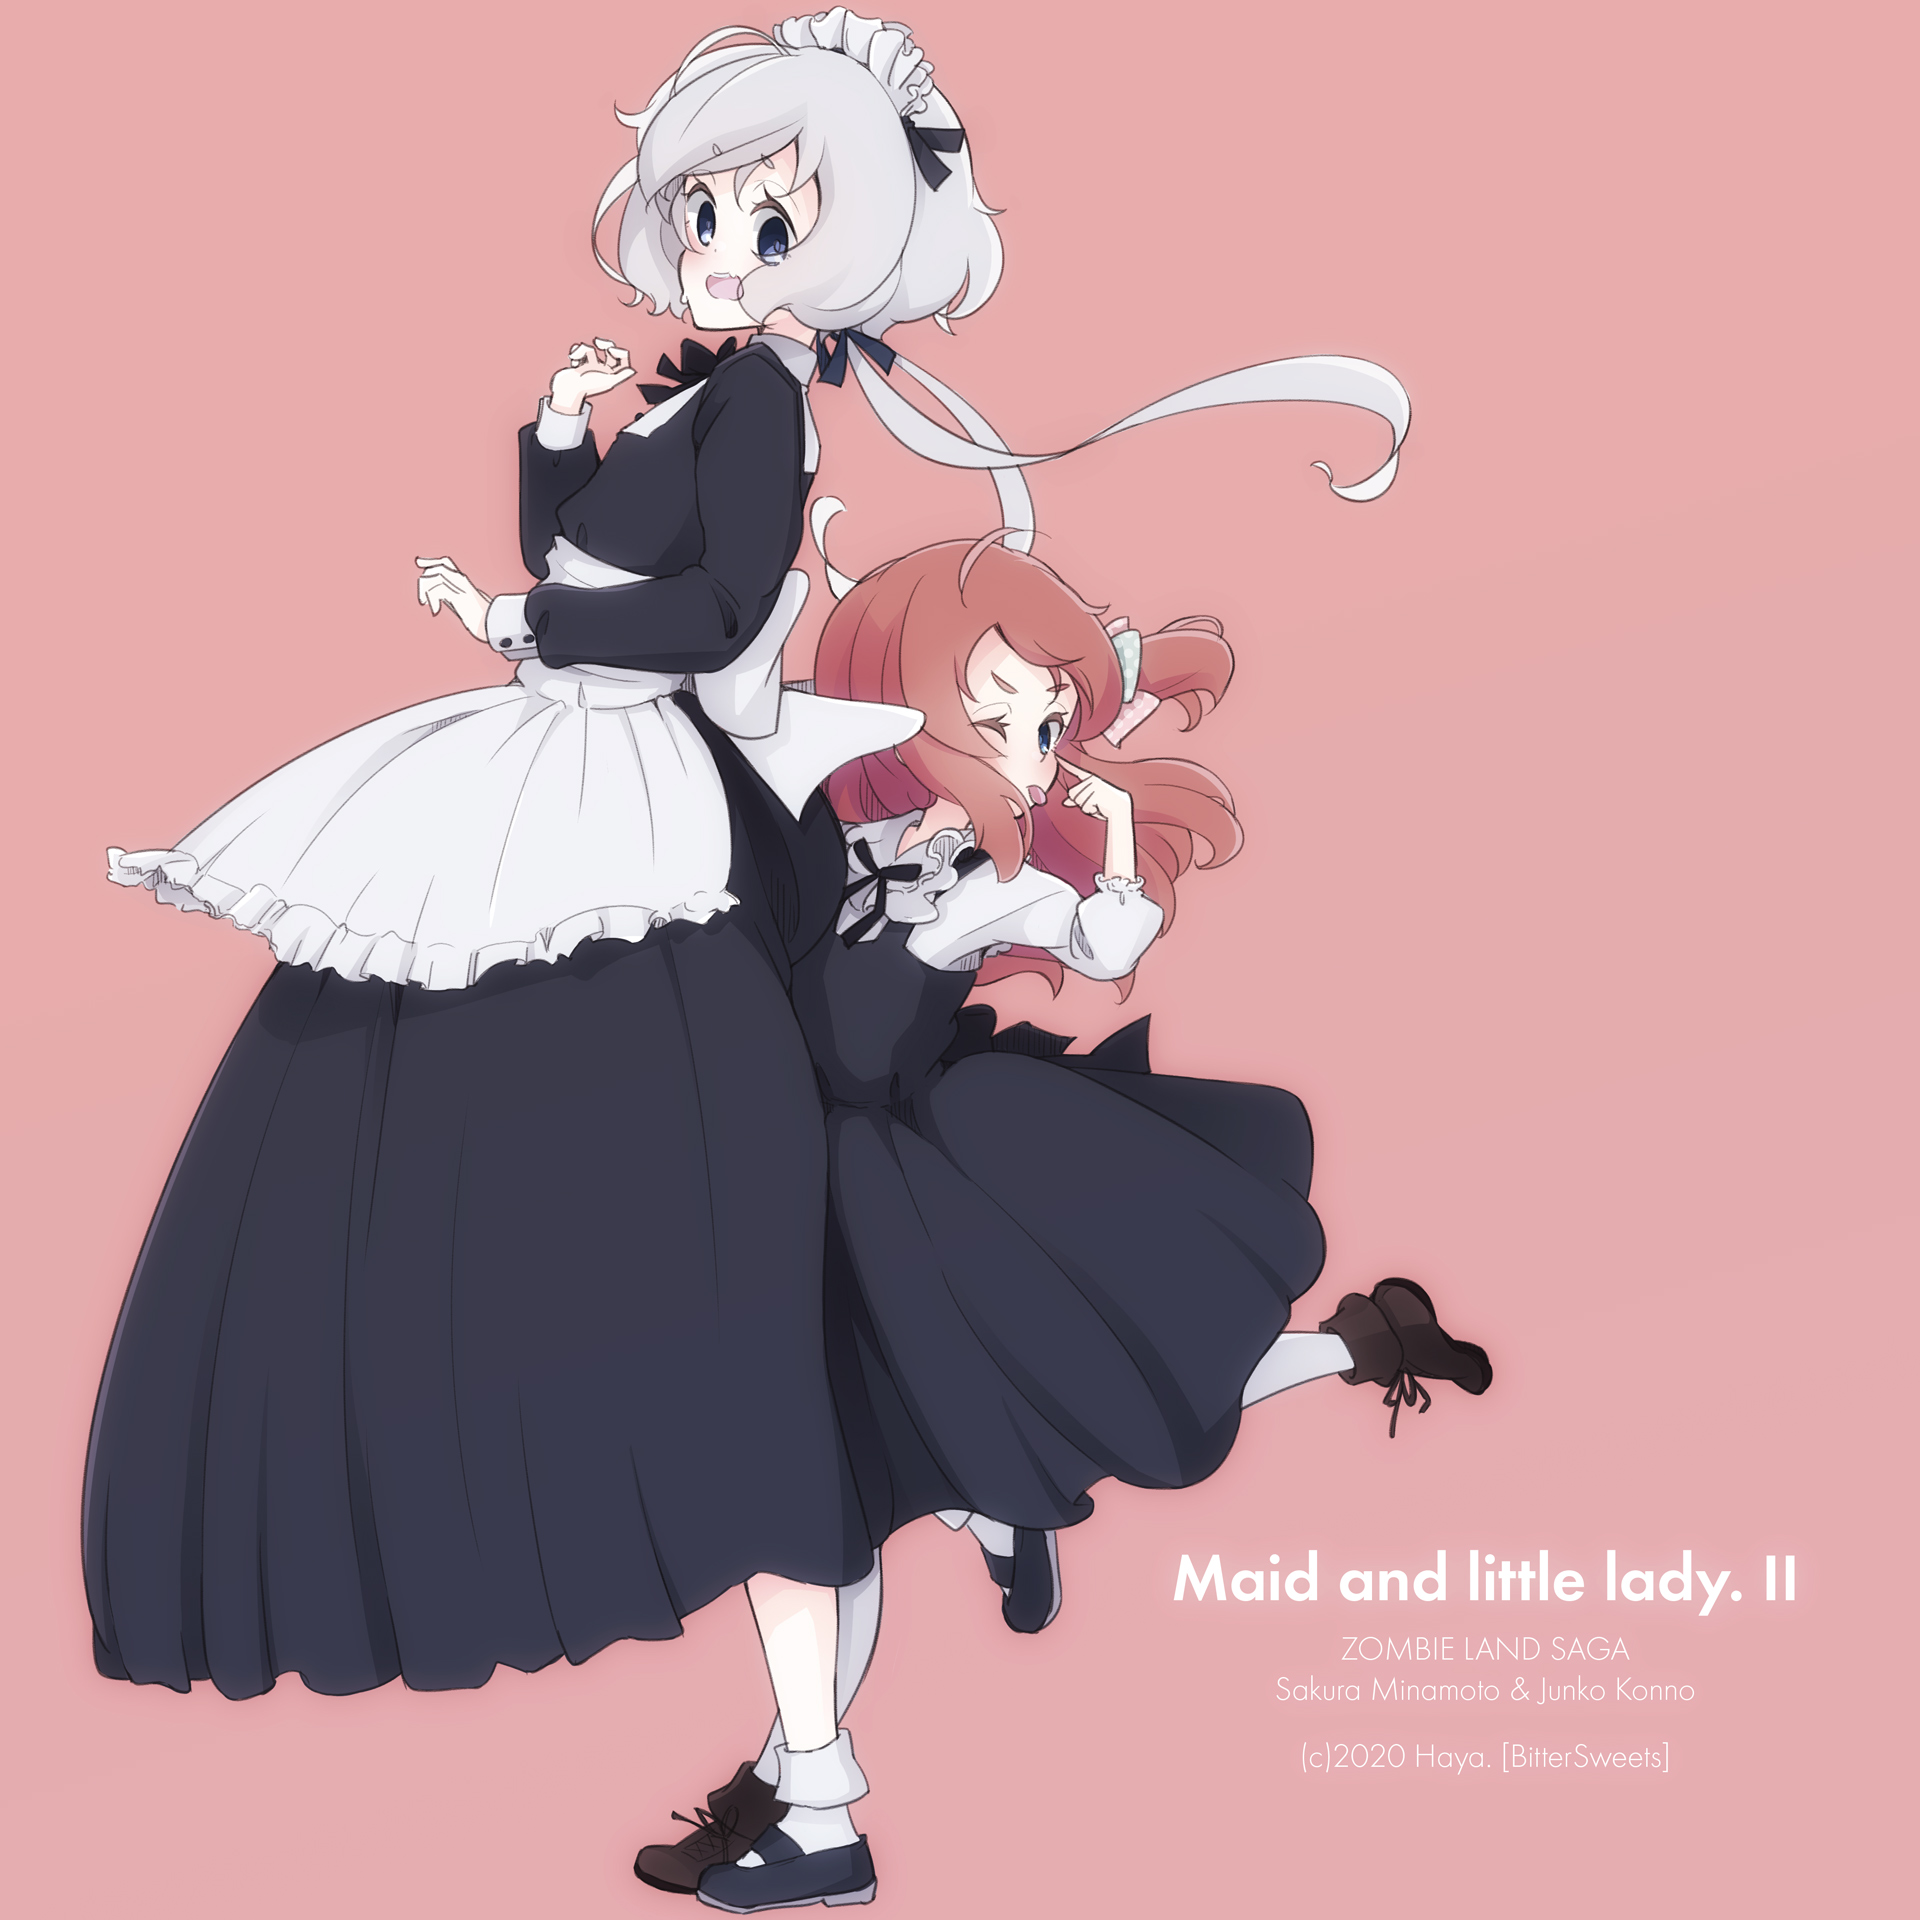 Maid and little lady. II